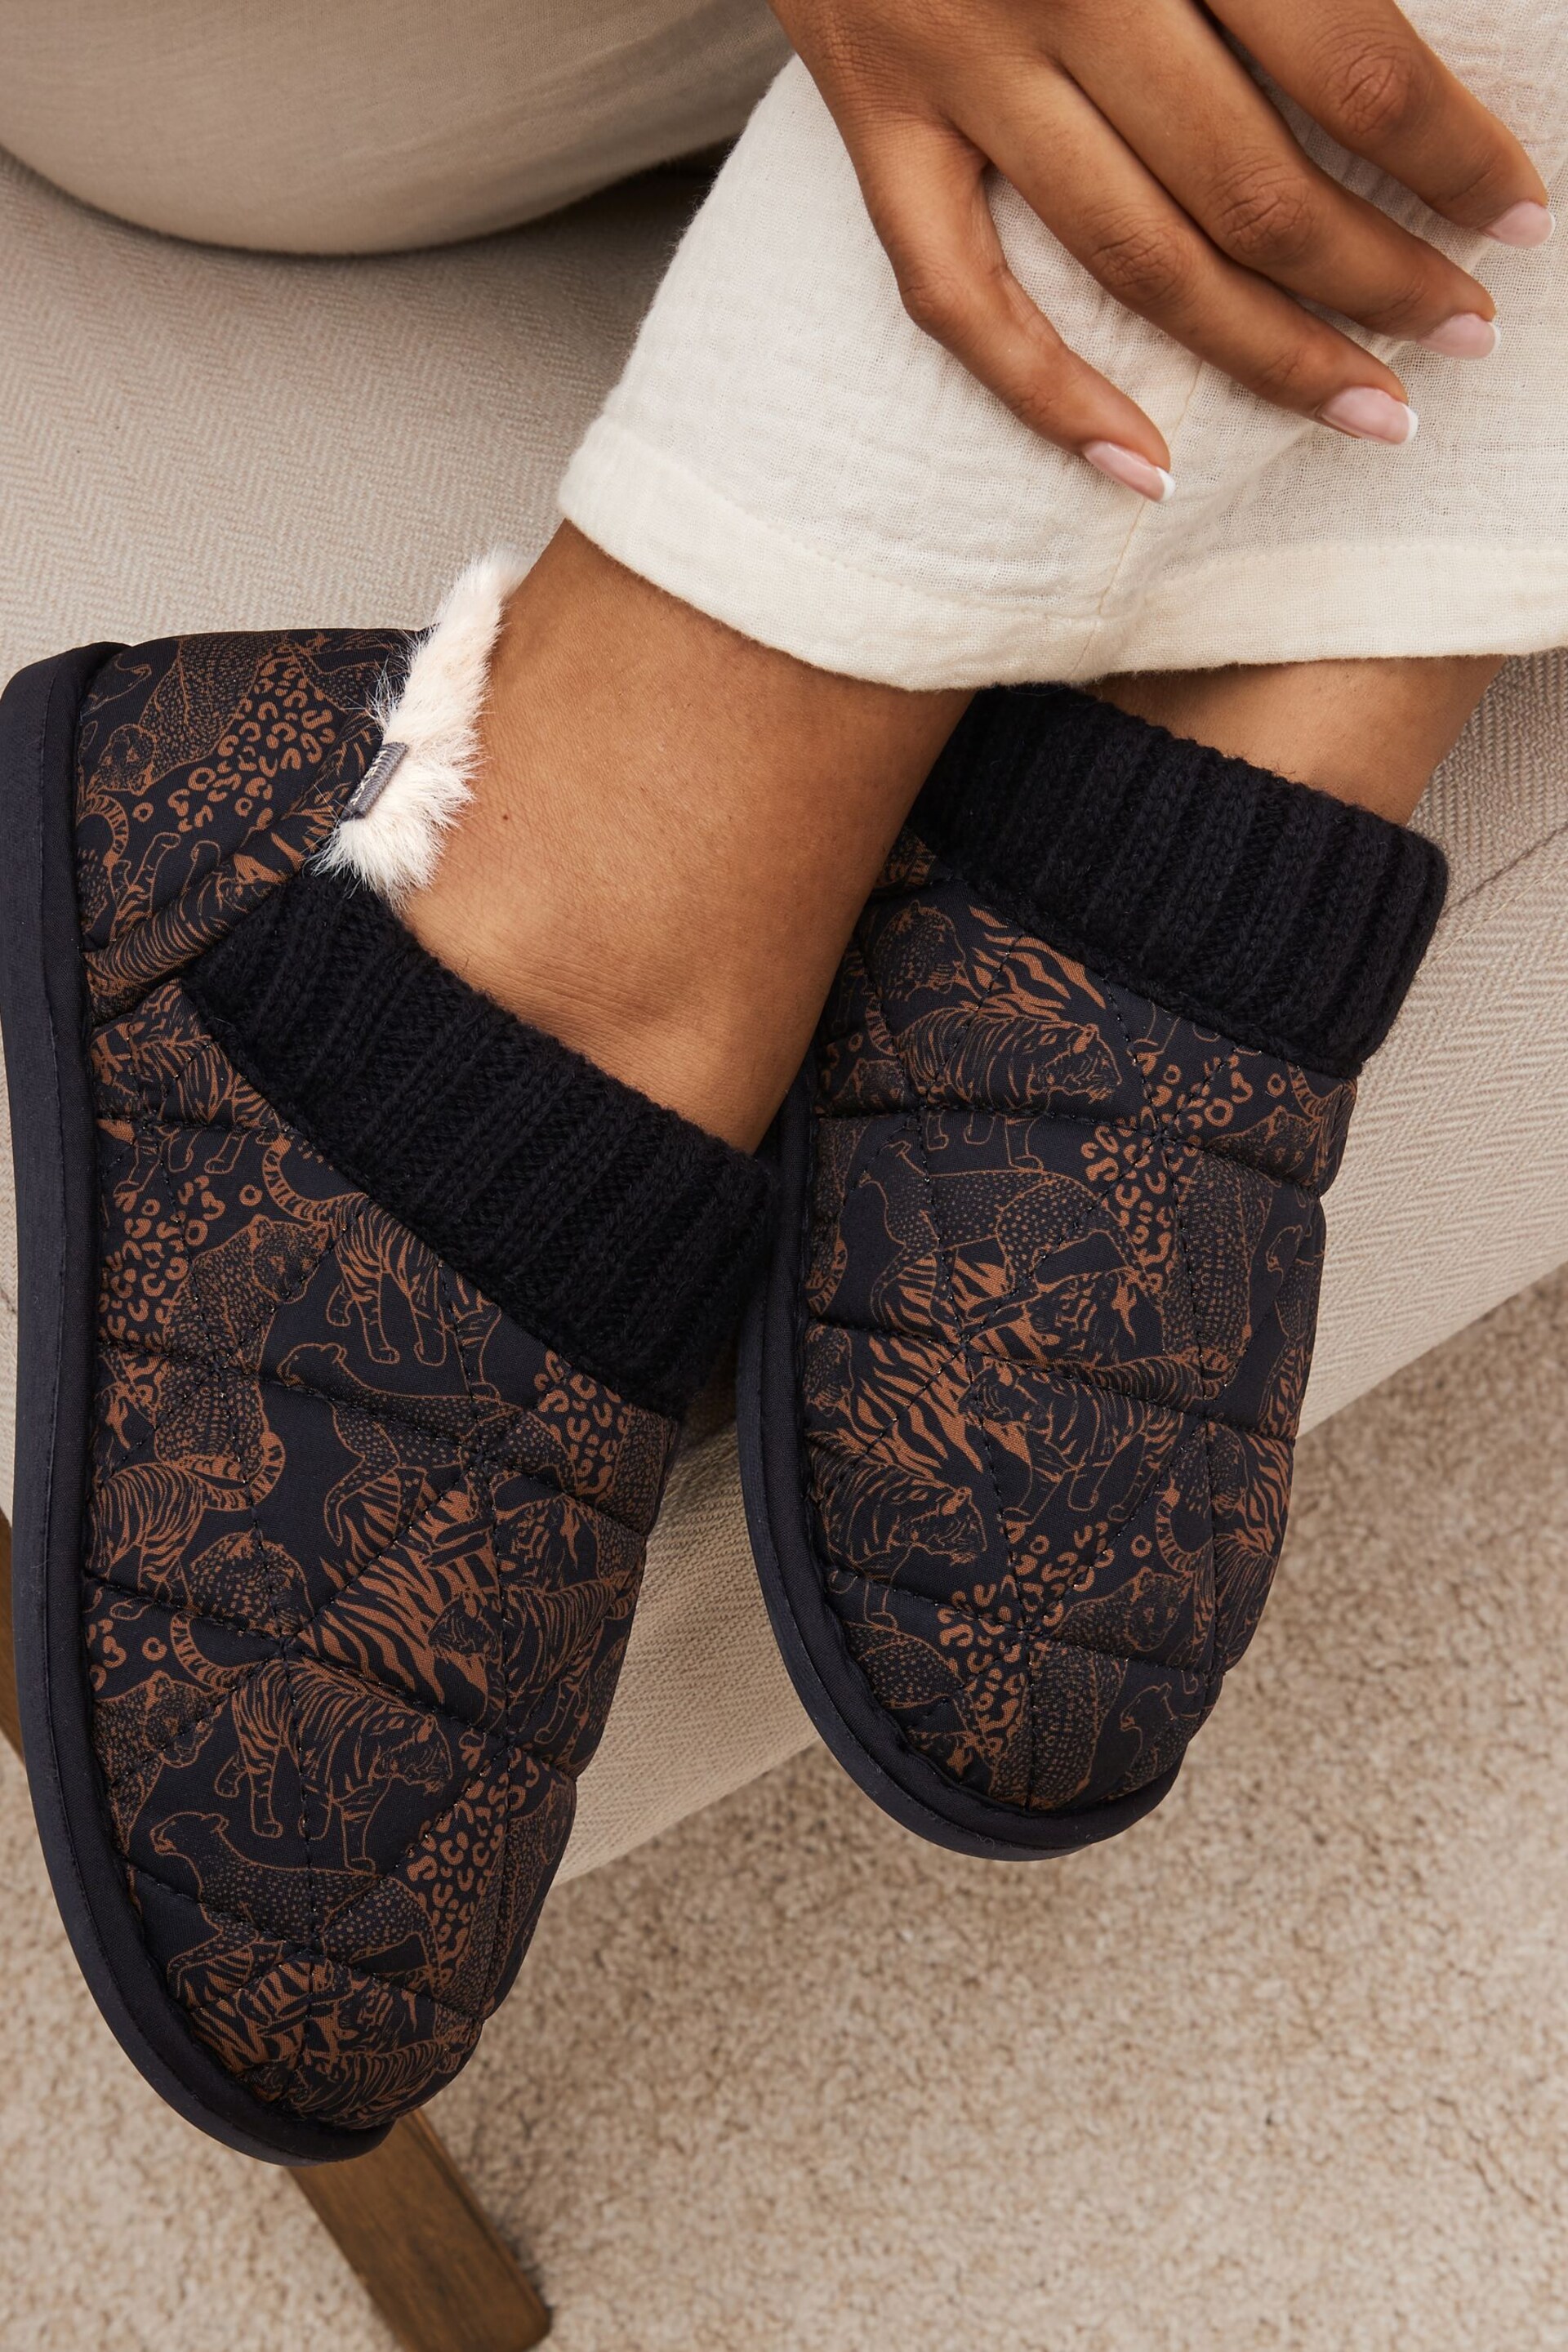 Black/Brown Quilted Shoot Slippers - Image 1 of 8